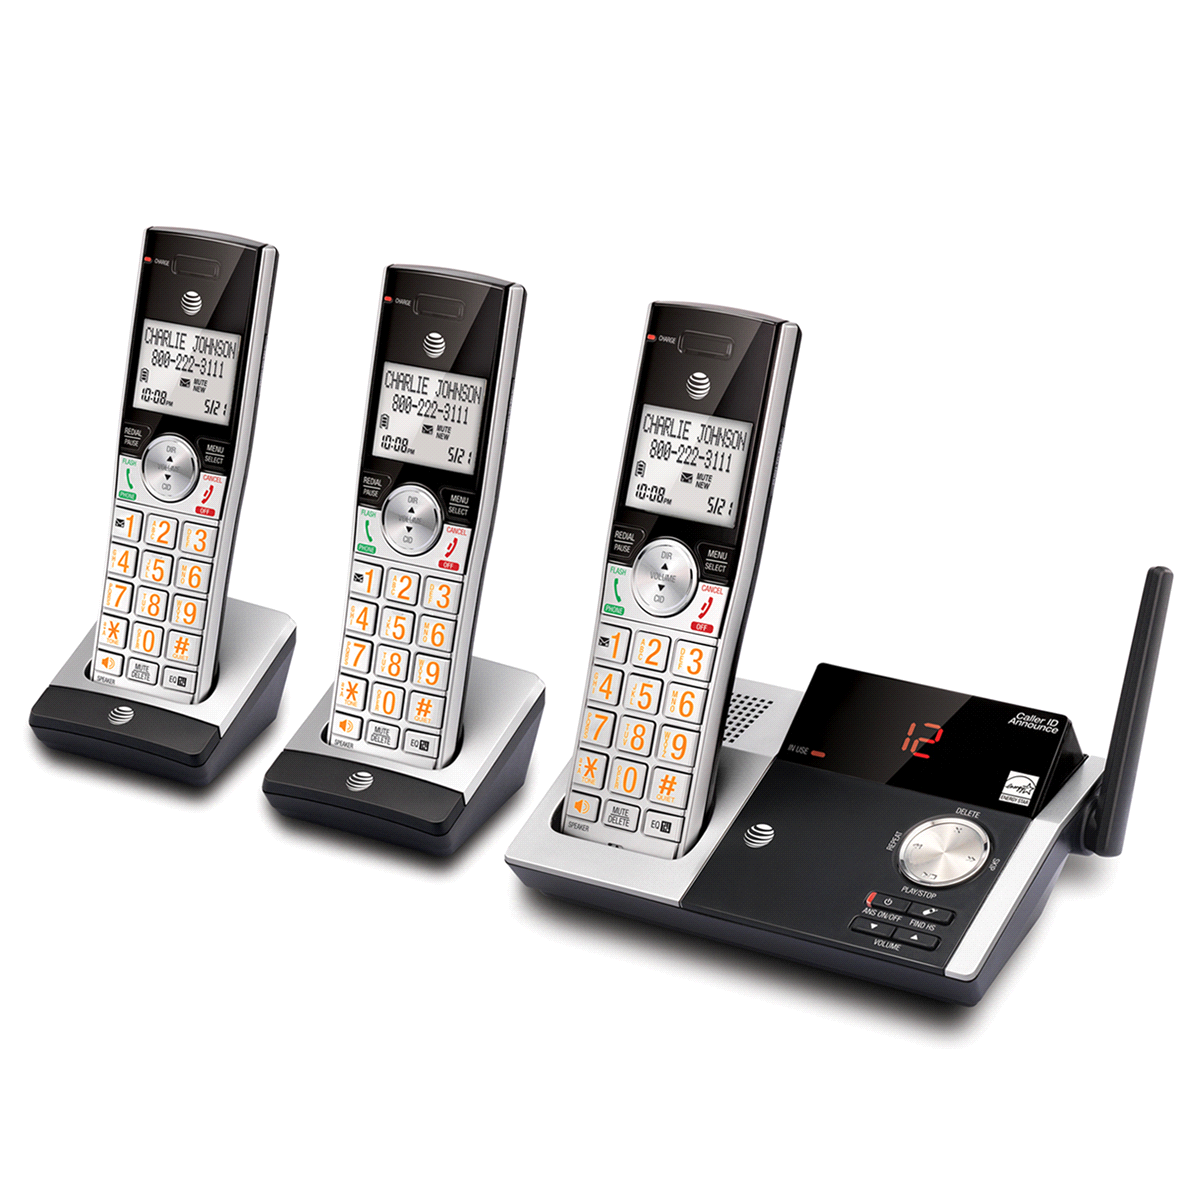 slide 2 of 3, AT&T CL82315 DECT 6.0 Cordless Phone System With Digital Answering Machine, 3 Handsets - Black, 1 ct